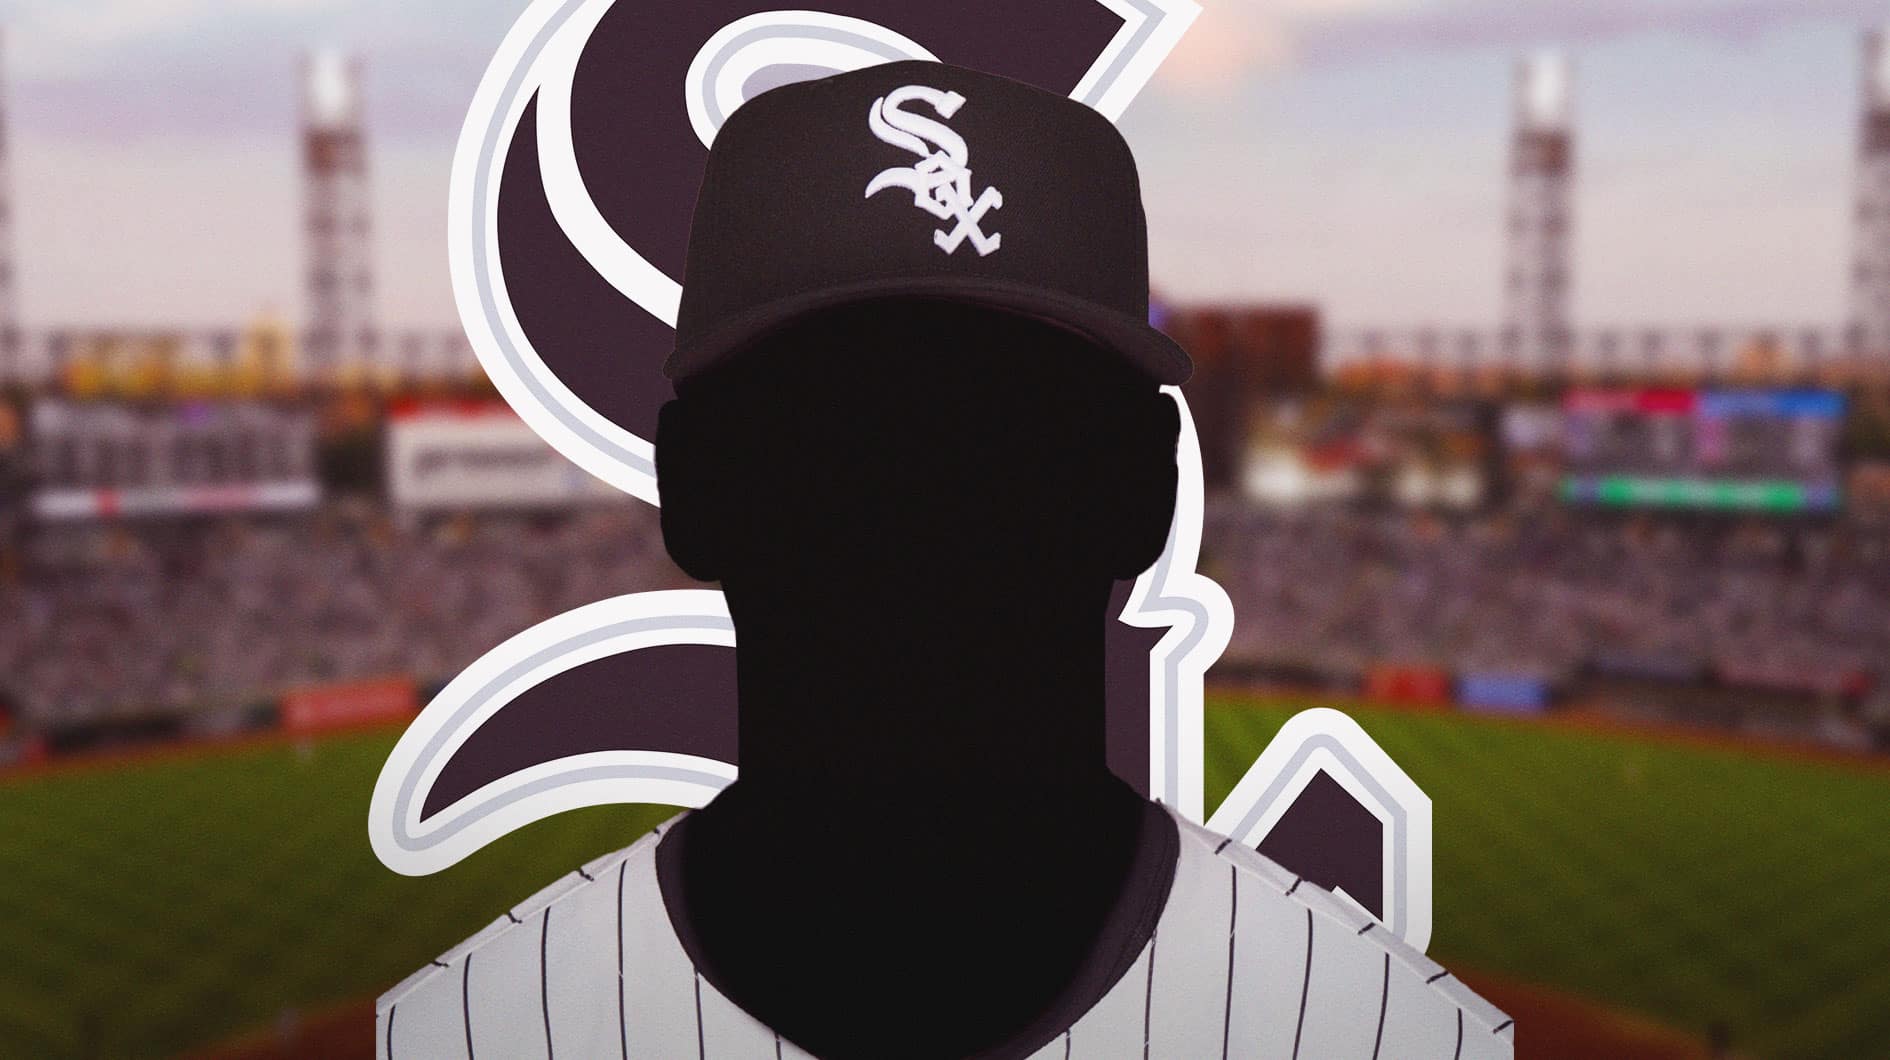 White Sox makes attention-grabbing on potential savior